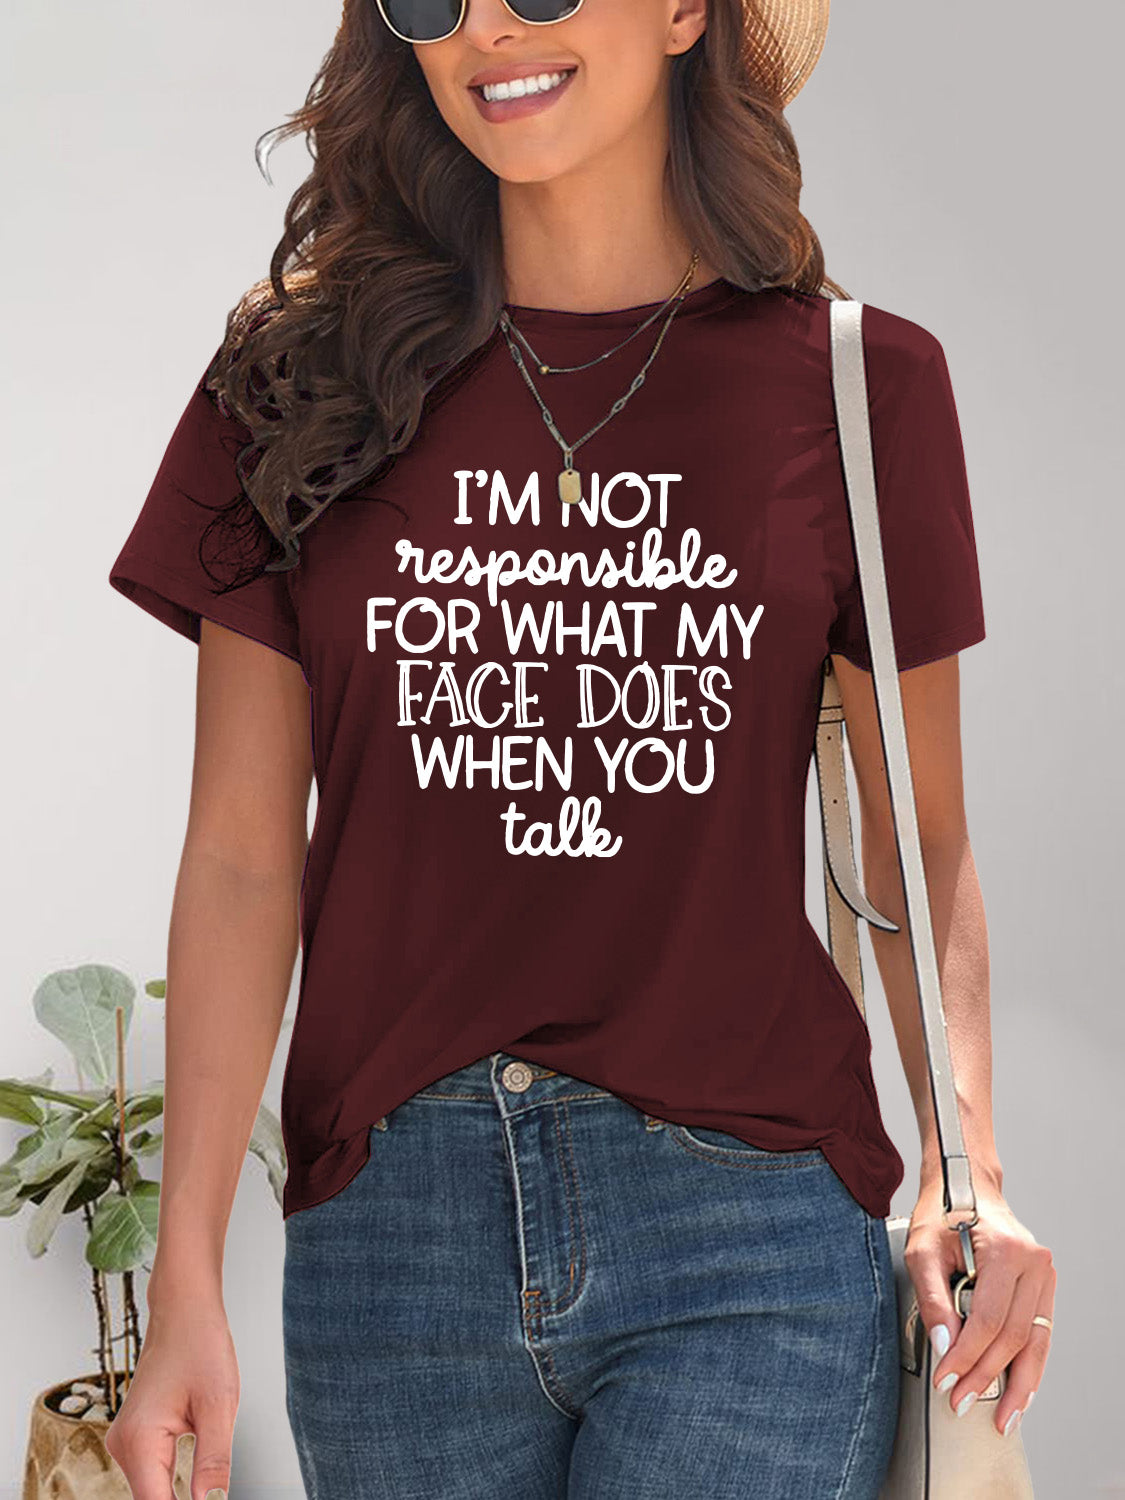  Woman smiling in a green graphic t-shirt with a humorous quote, epitomizing casual cool.